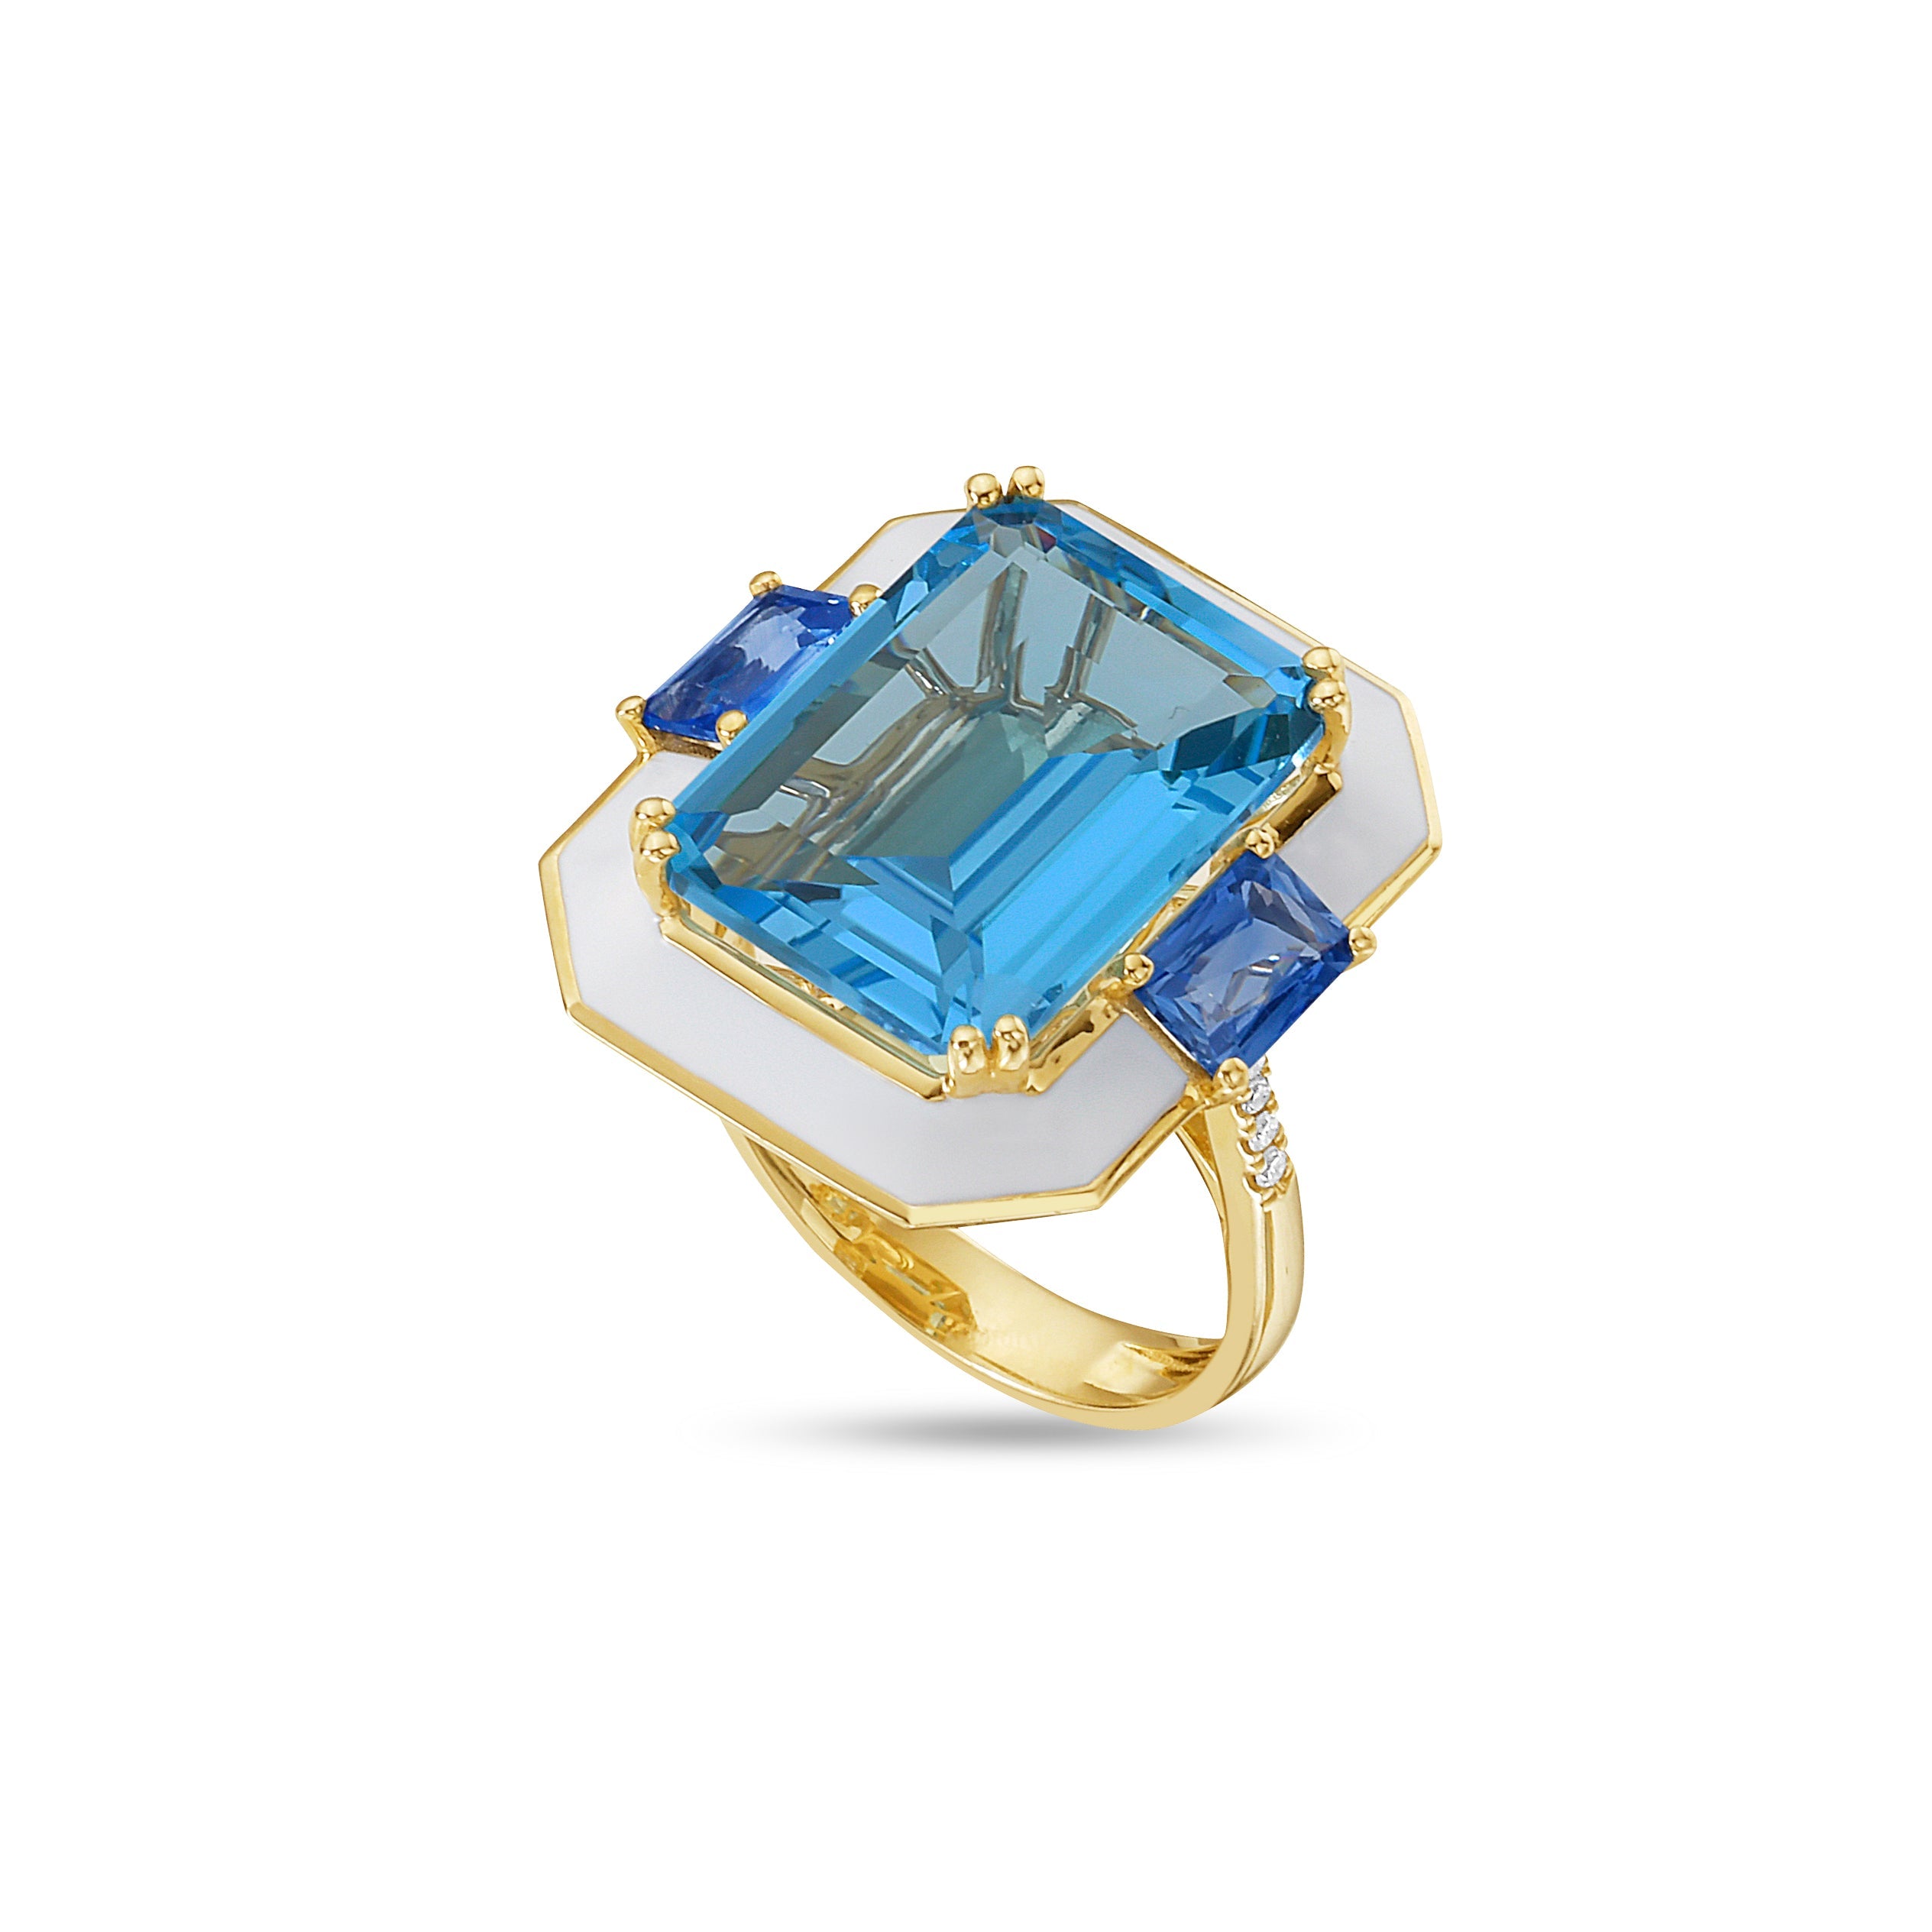 14K RING WITH 10 DIAMONDS 0.06CT, 2 STONES 1.24CT AND 1 BLUE TOPAZ  12CT